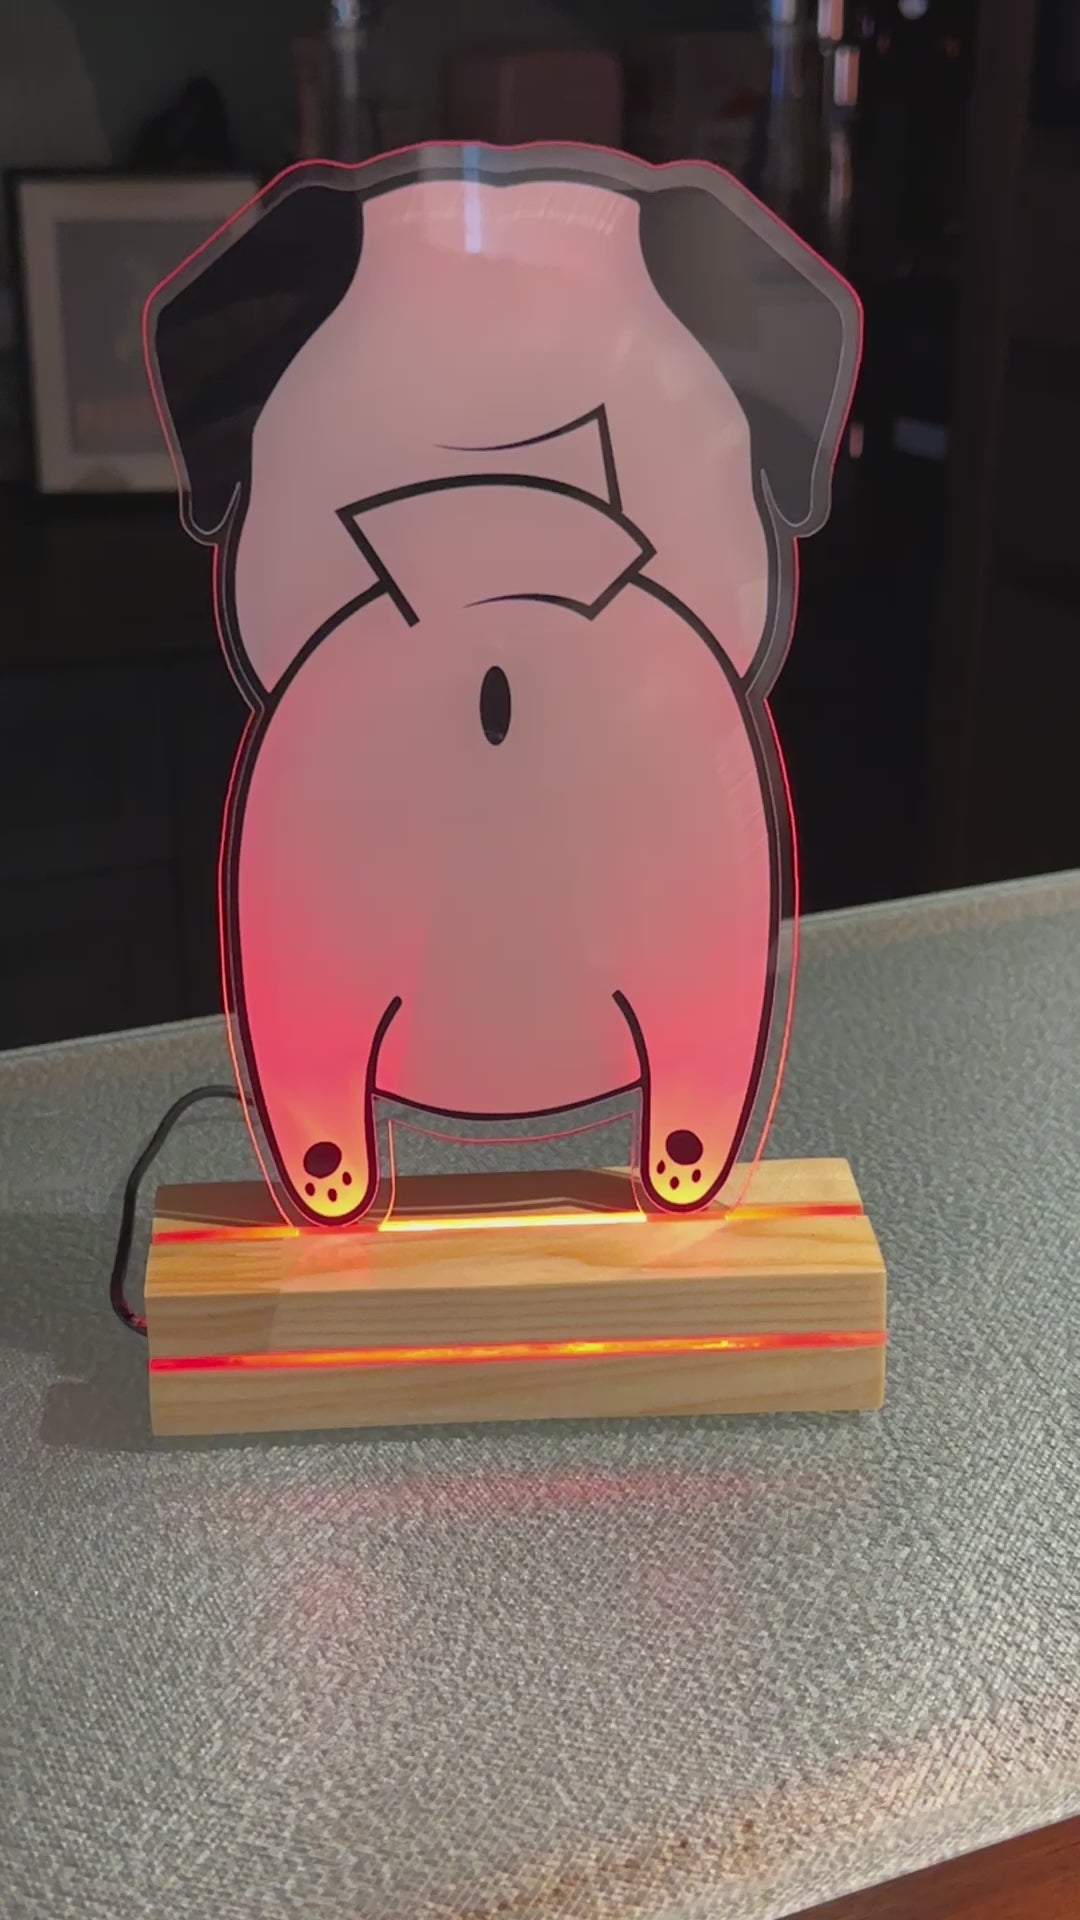 Video showing the LED lights changing on Pug Butt night light.